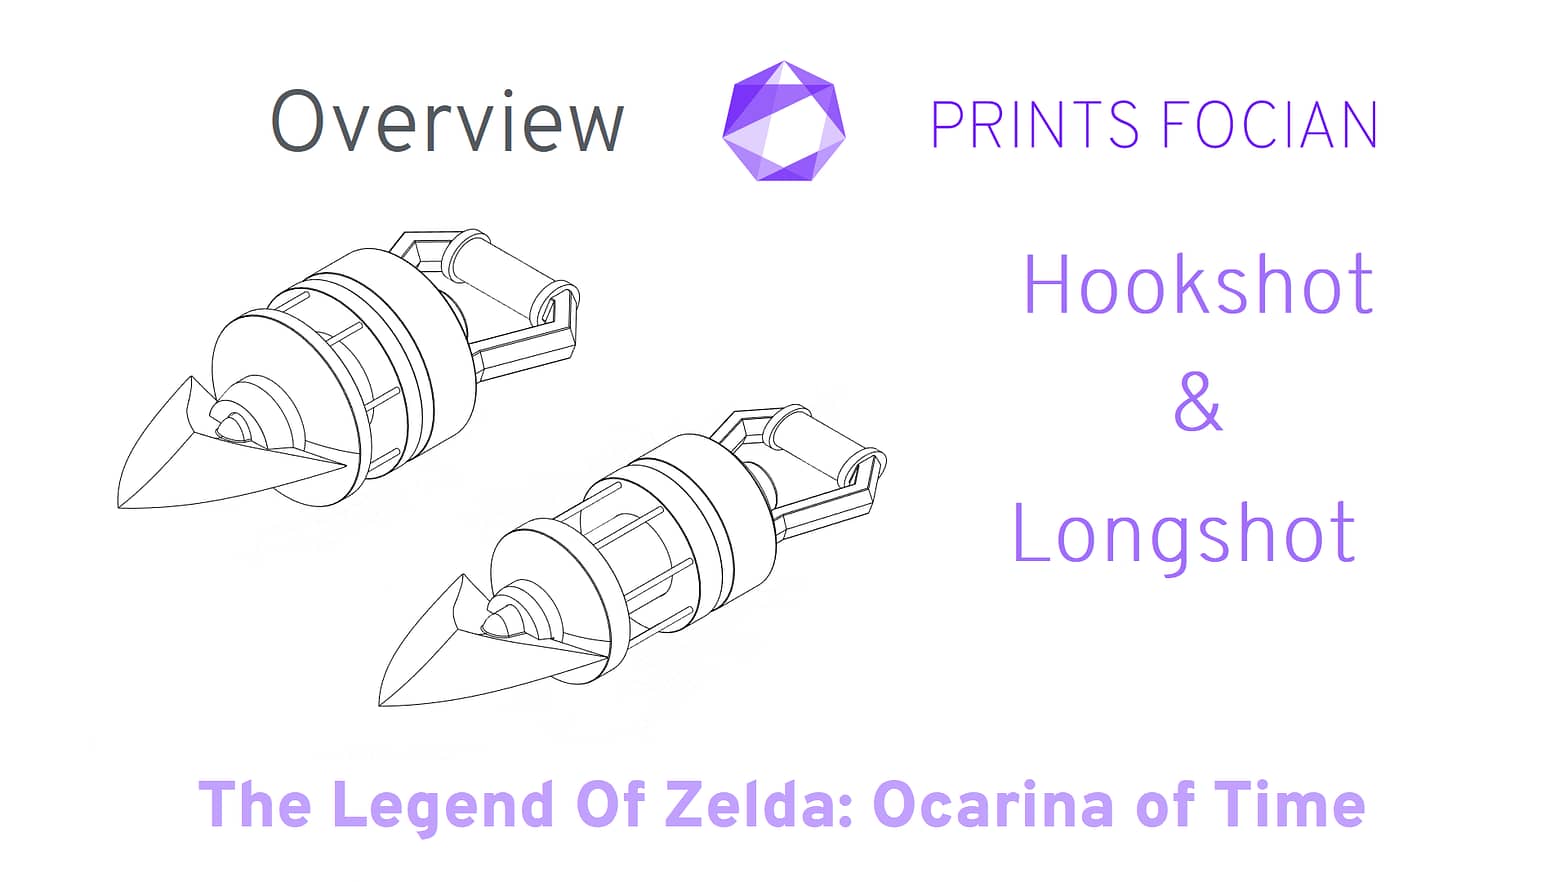 Wireframe image of the Hookshot and Longshot on a white background. Prints Focian Icon top and central. Text: Purple Prints Focian, Hookshot & Longshot, The Legend of Zelda: Ocarina of Time and dark grey Overview